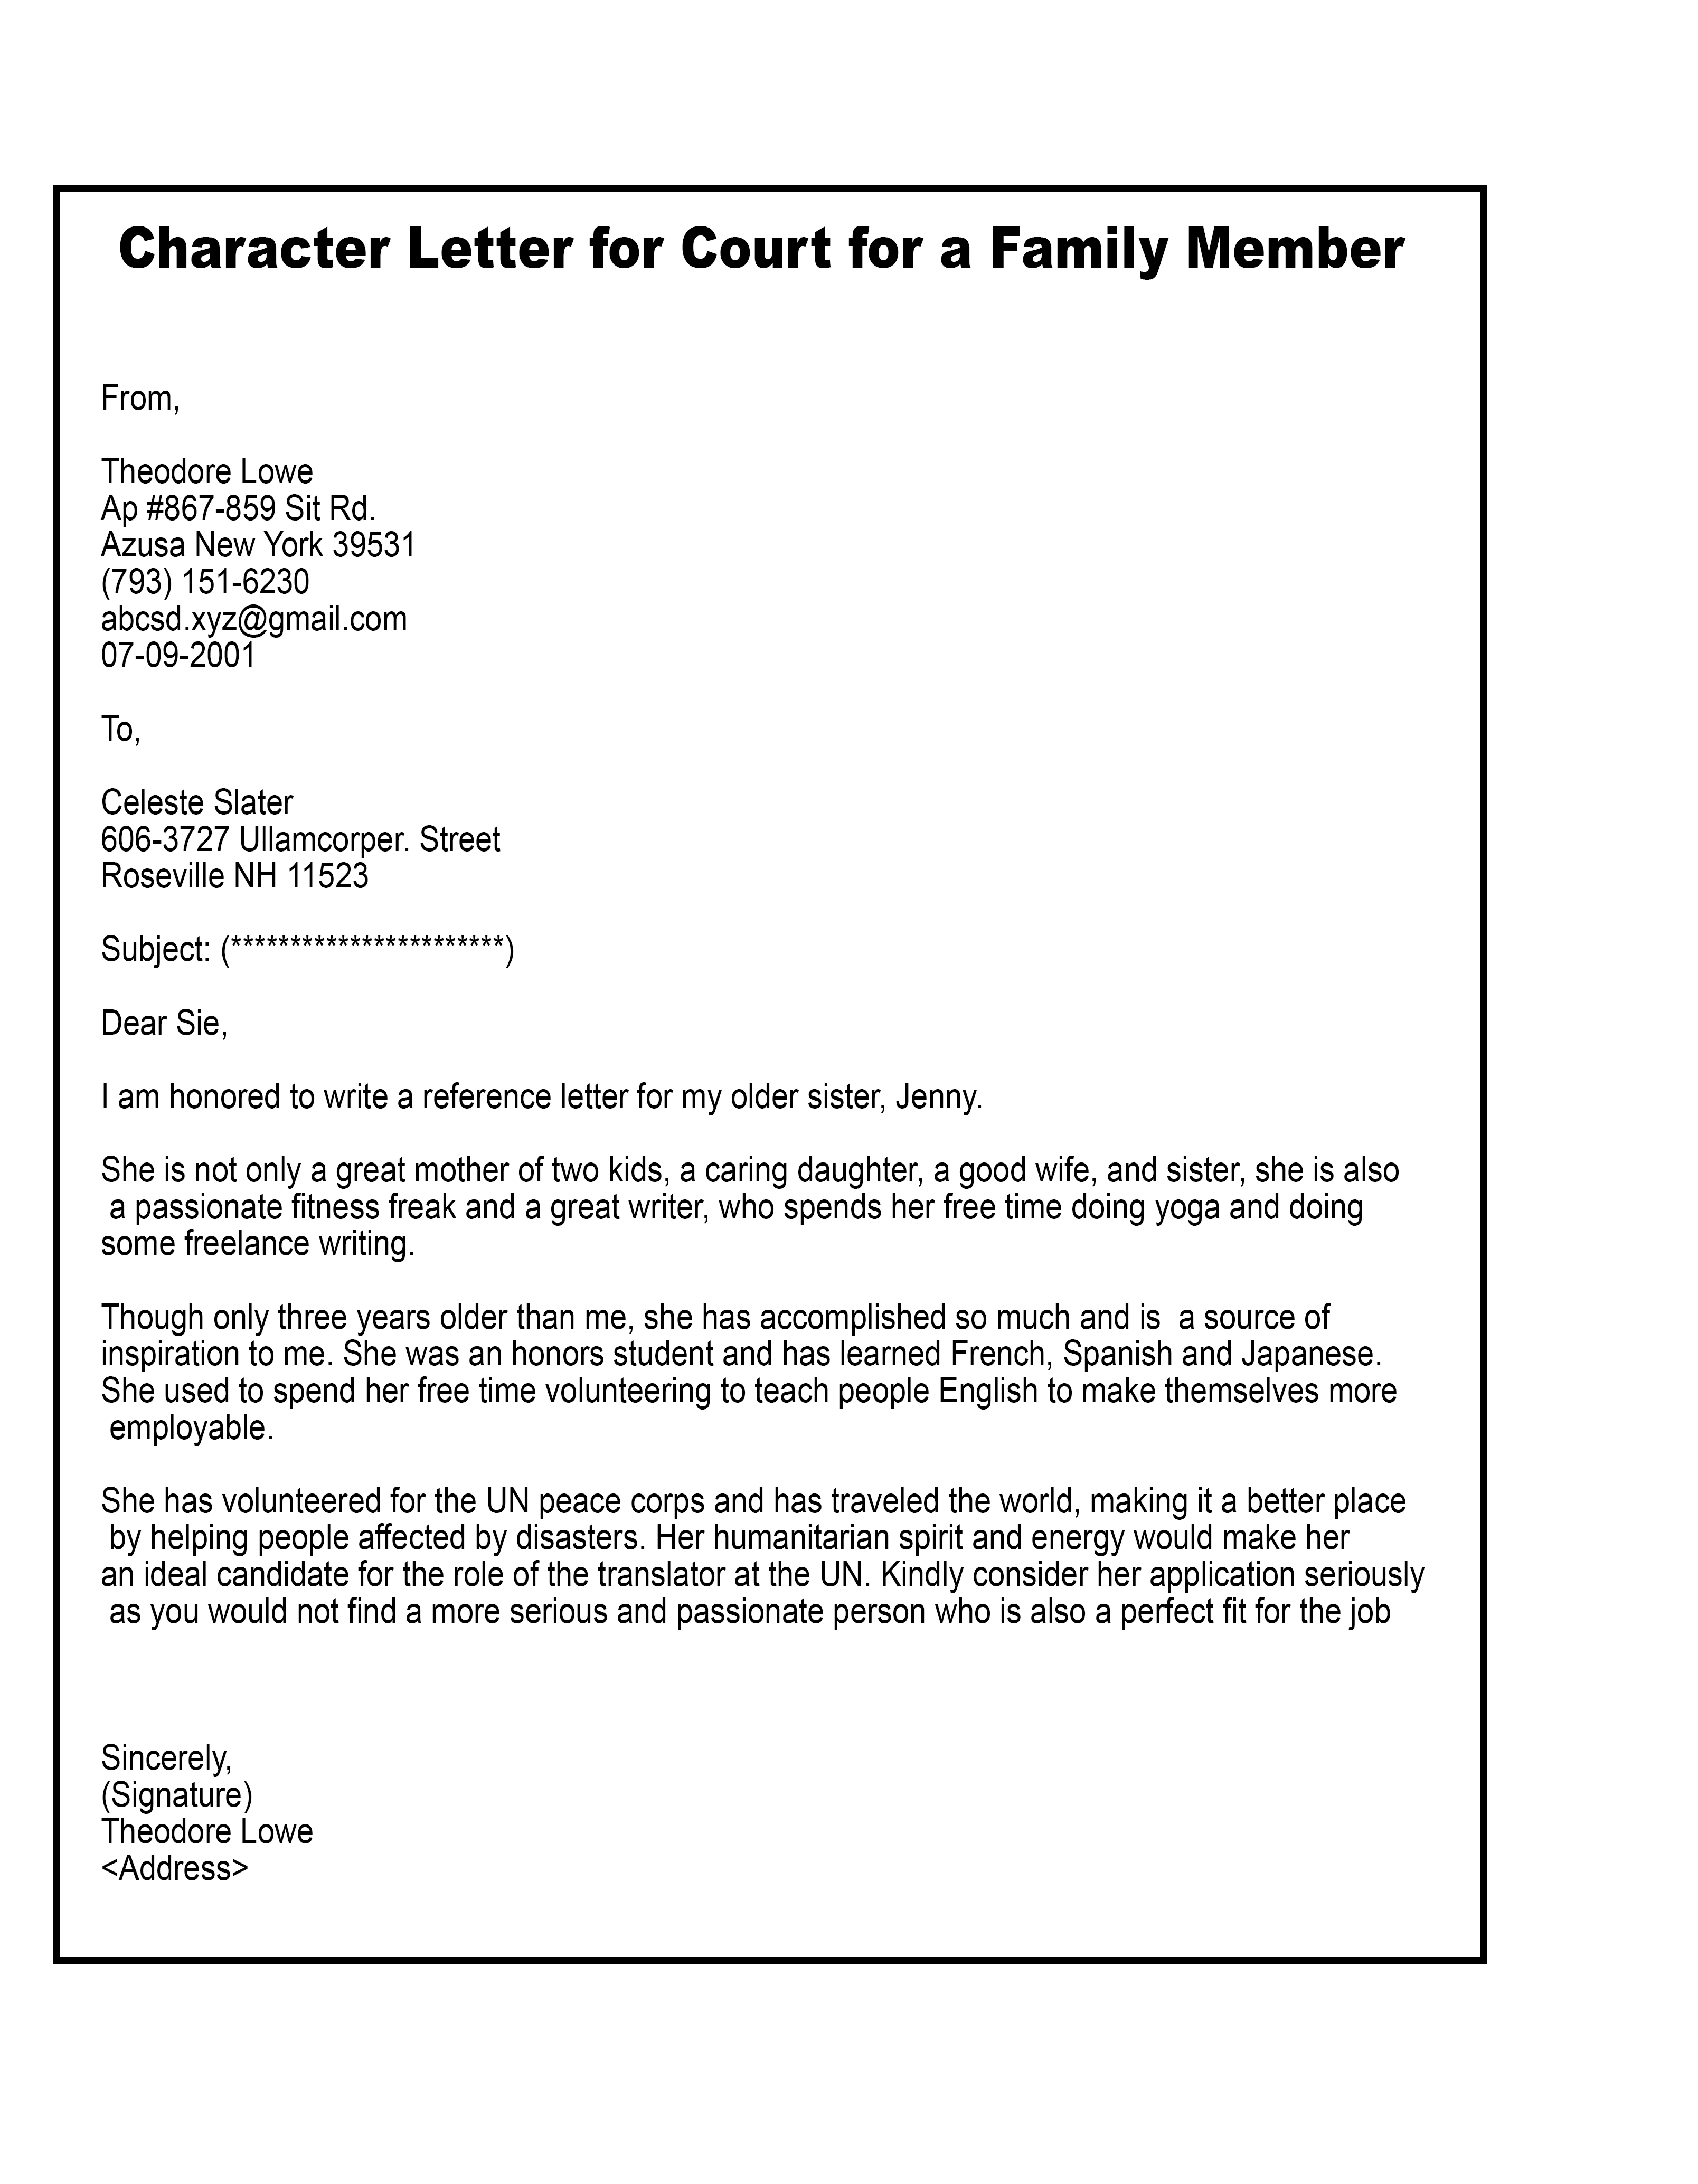 Character Letter for Court for a Family Member (1)